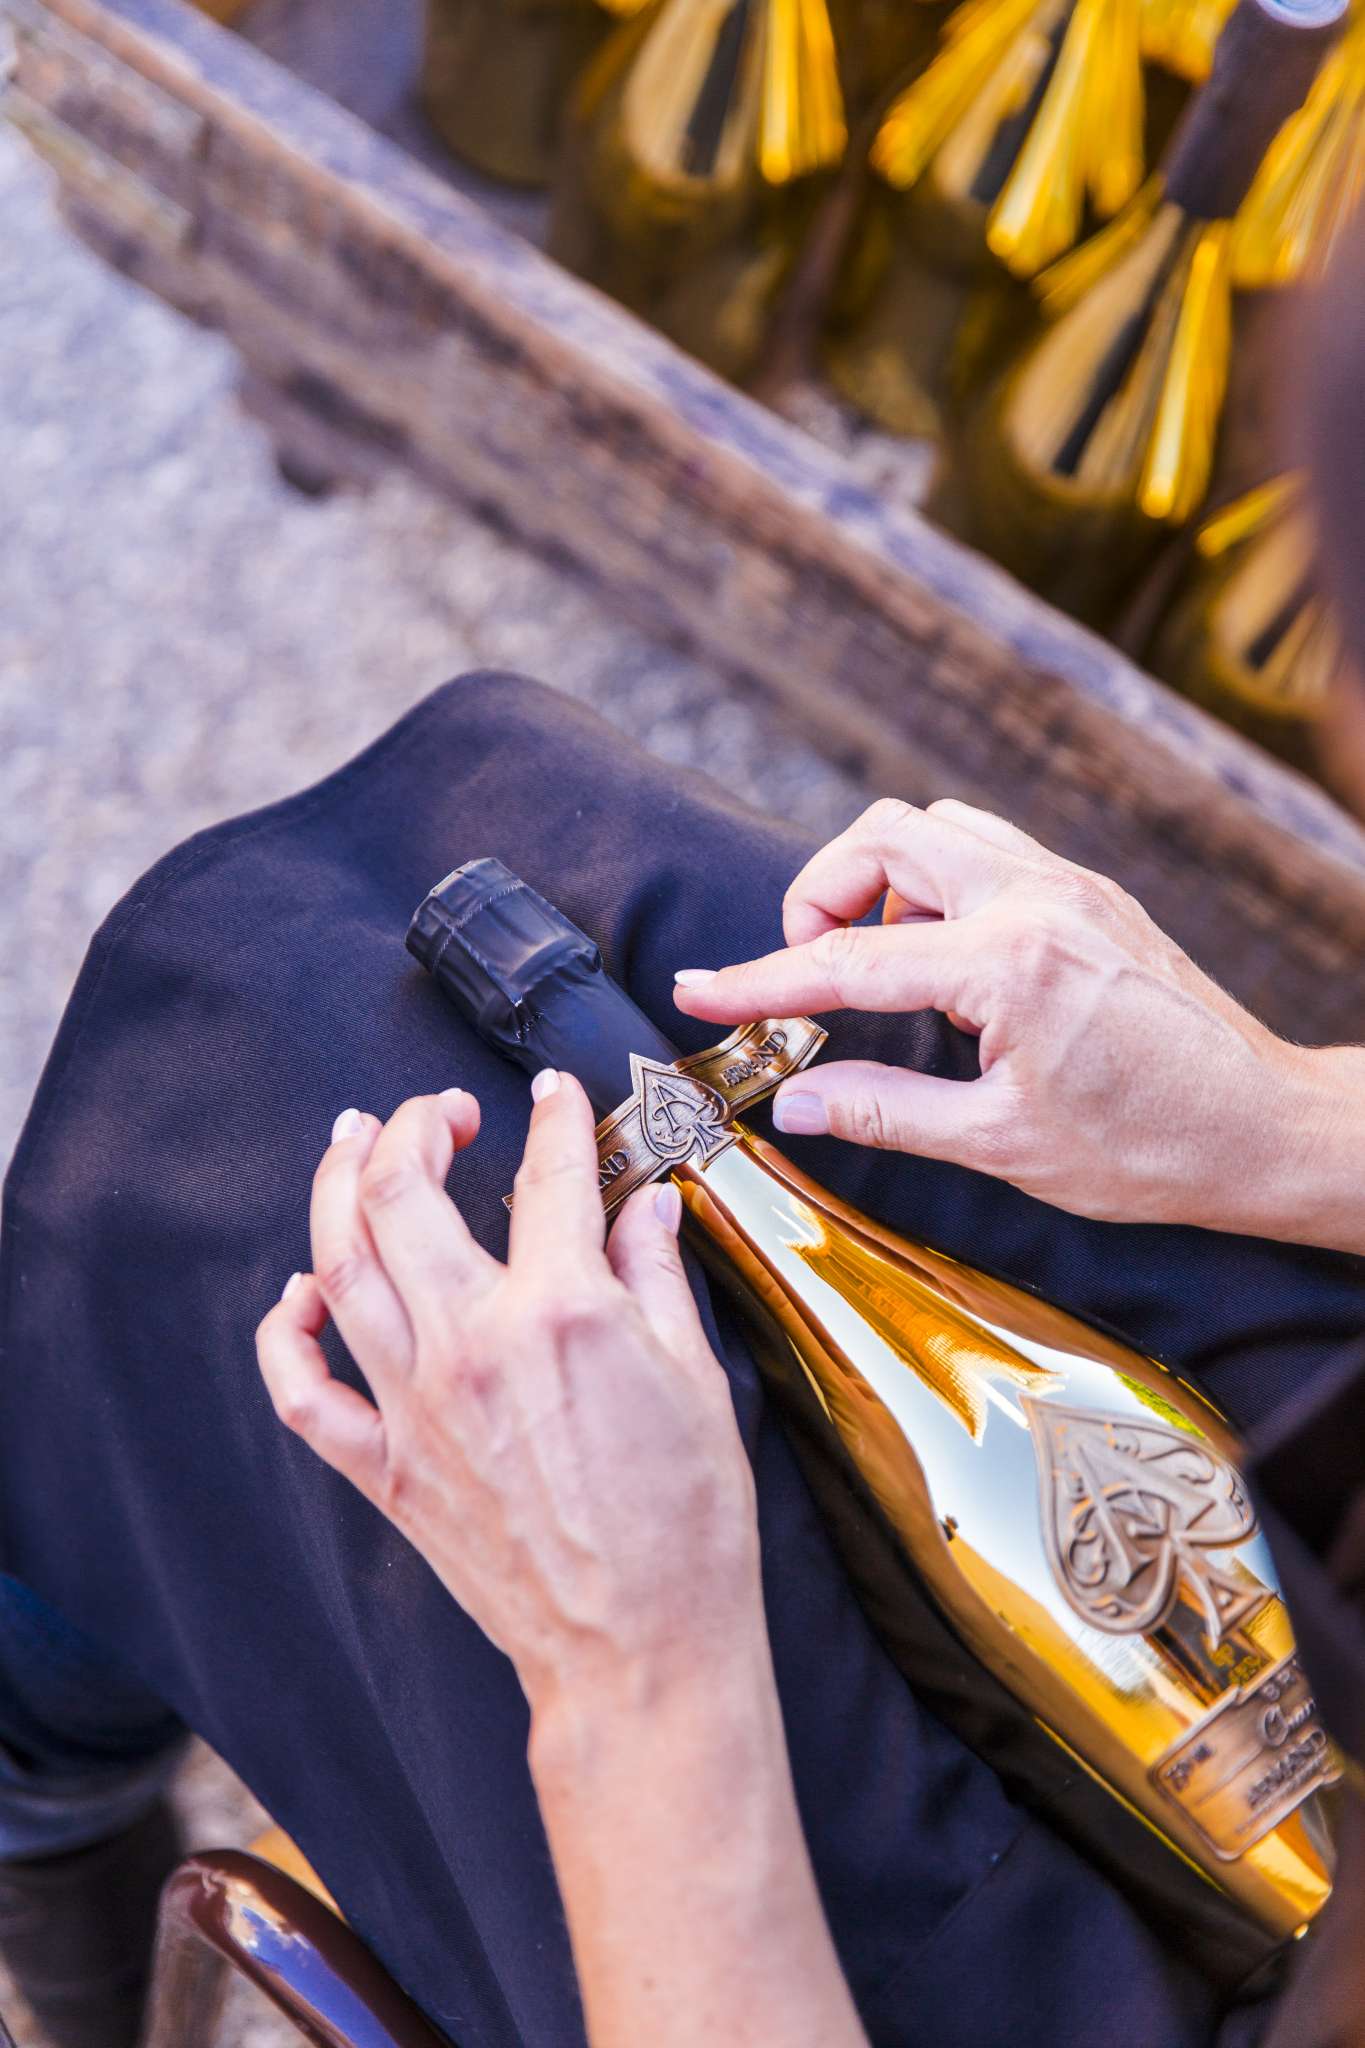 Armand de Brignac, Jay Z's champagne brand, is set to launch Blanc de Noirs Assemblage Two in Hong Kong this month